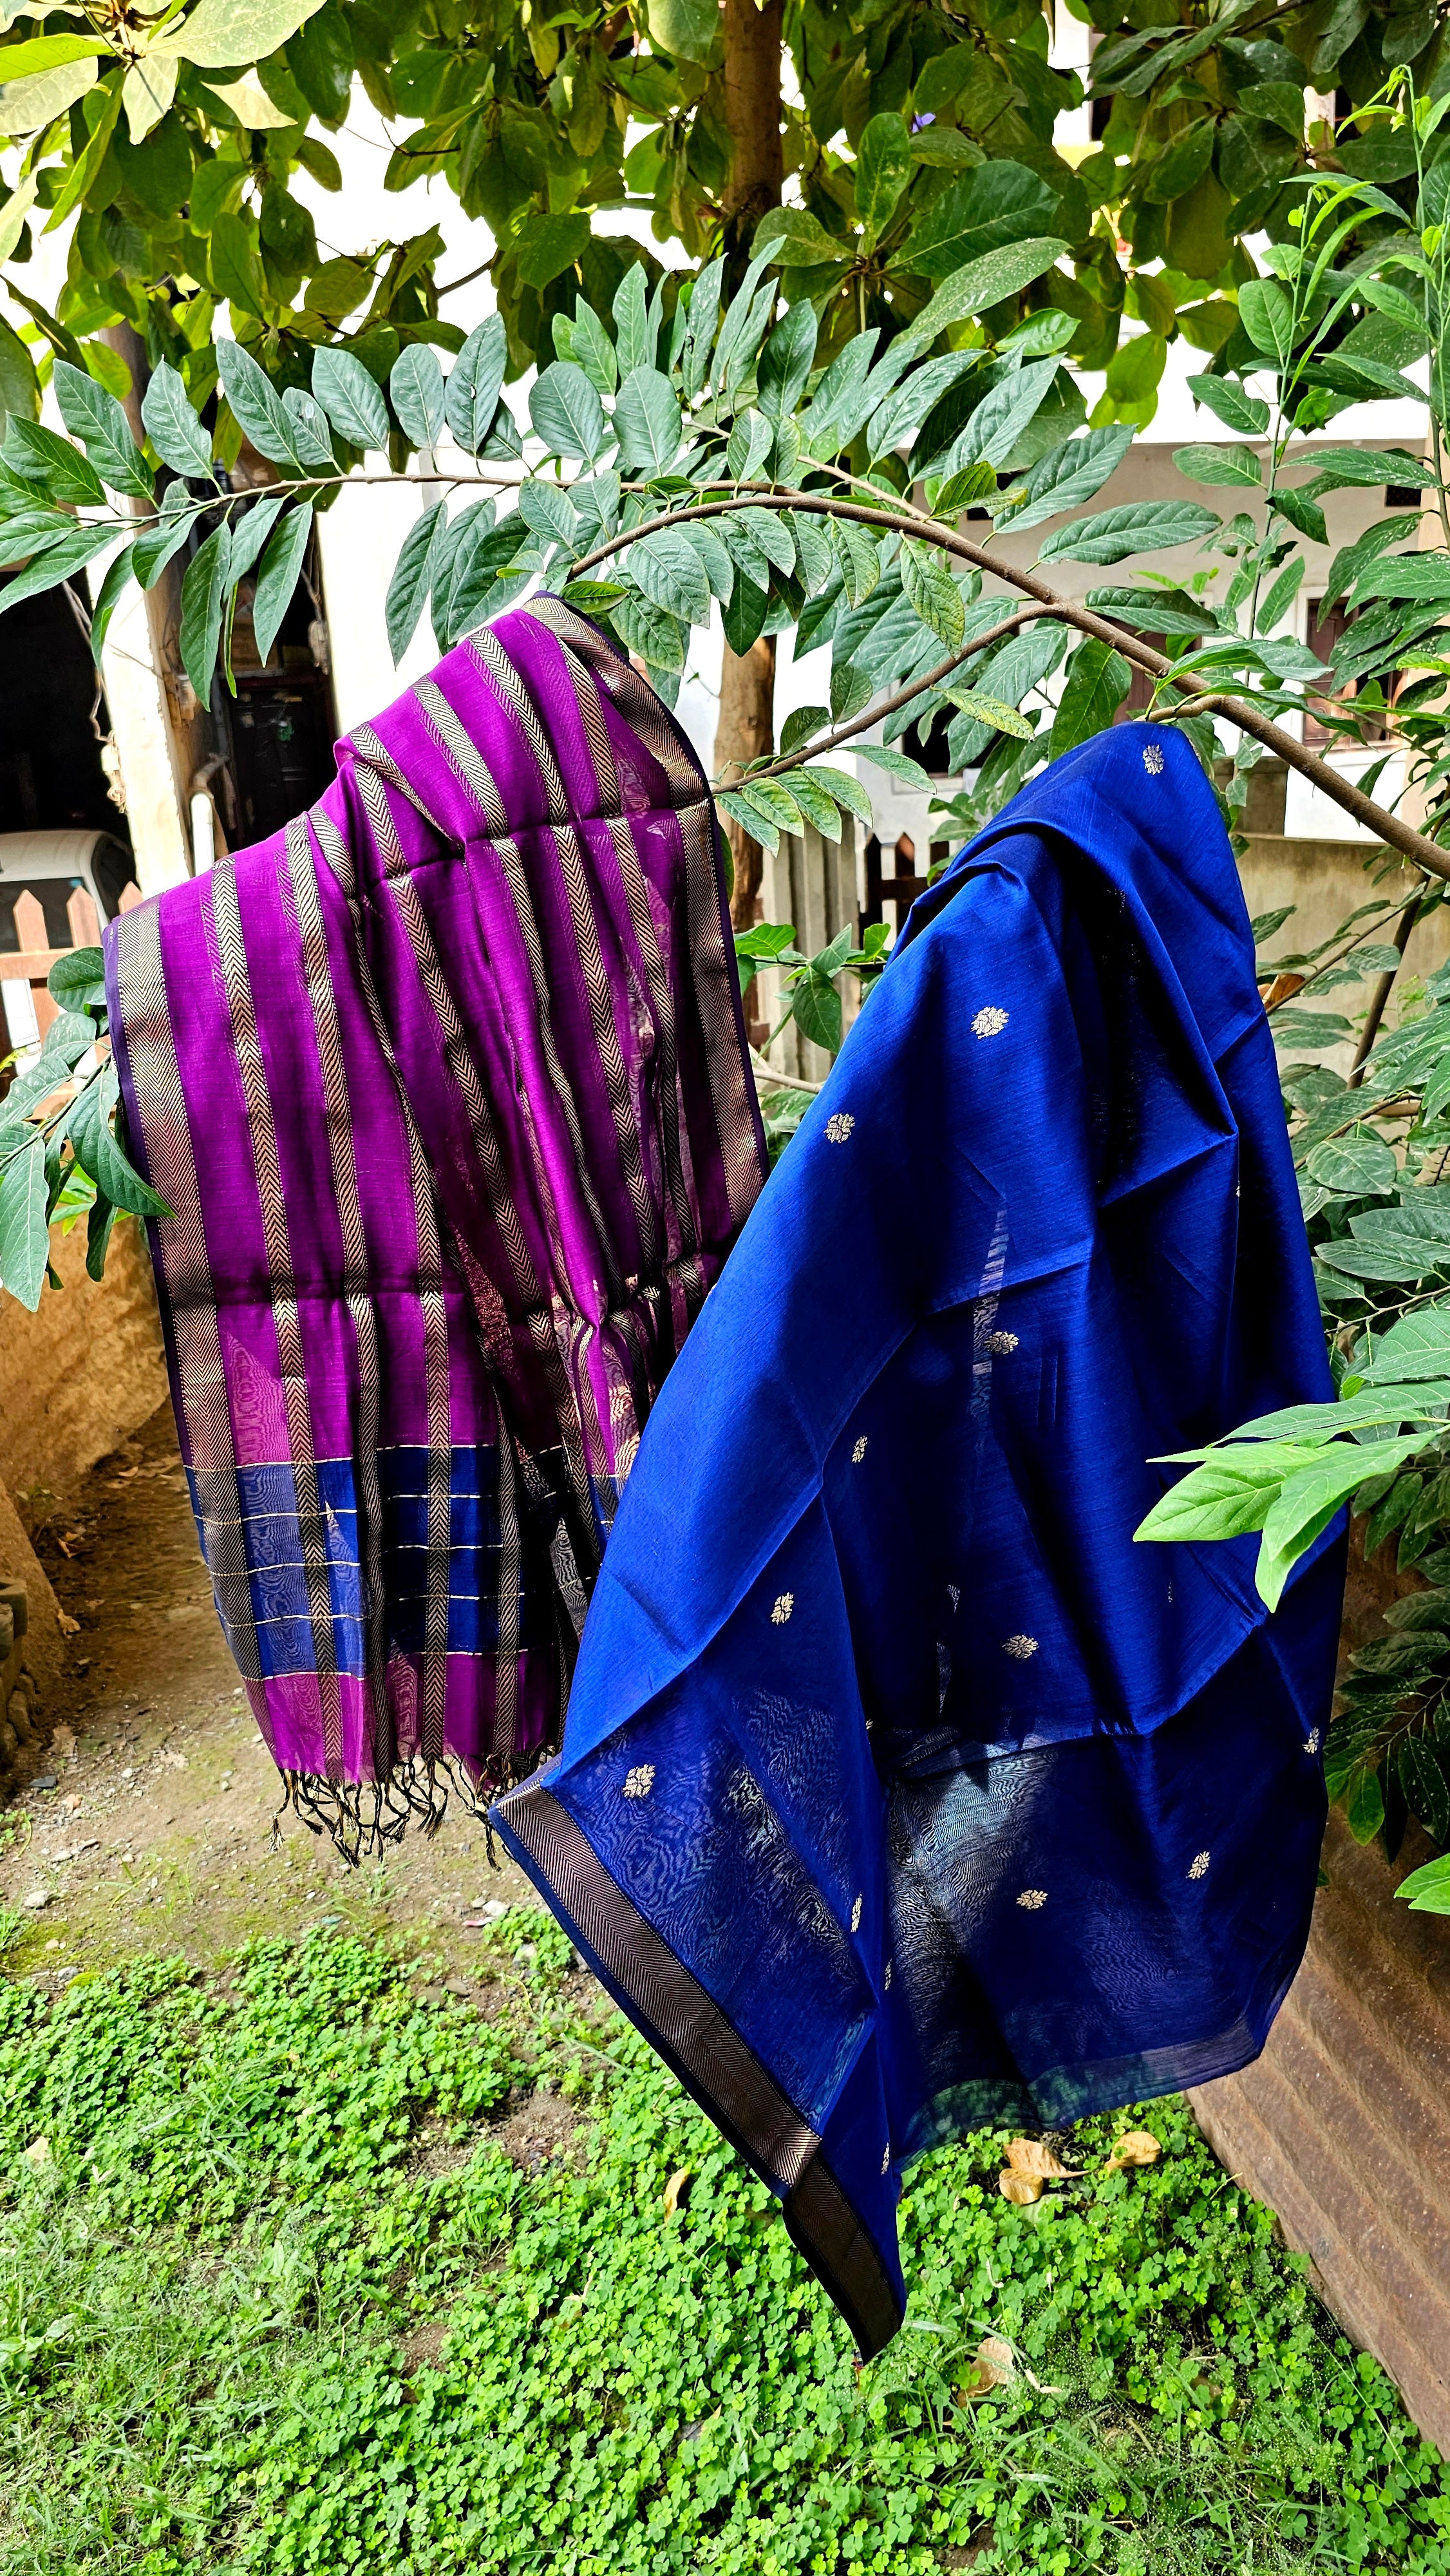 Royal Bliss: Top and Dupatta Extravaganza in Purple and Blue with 16 Gold Zari Borders.